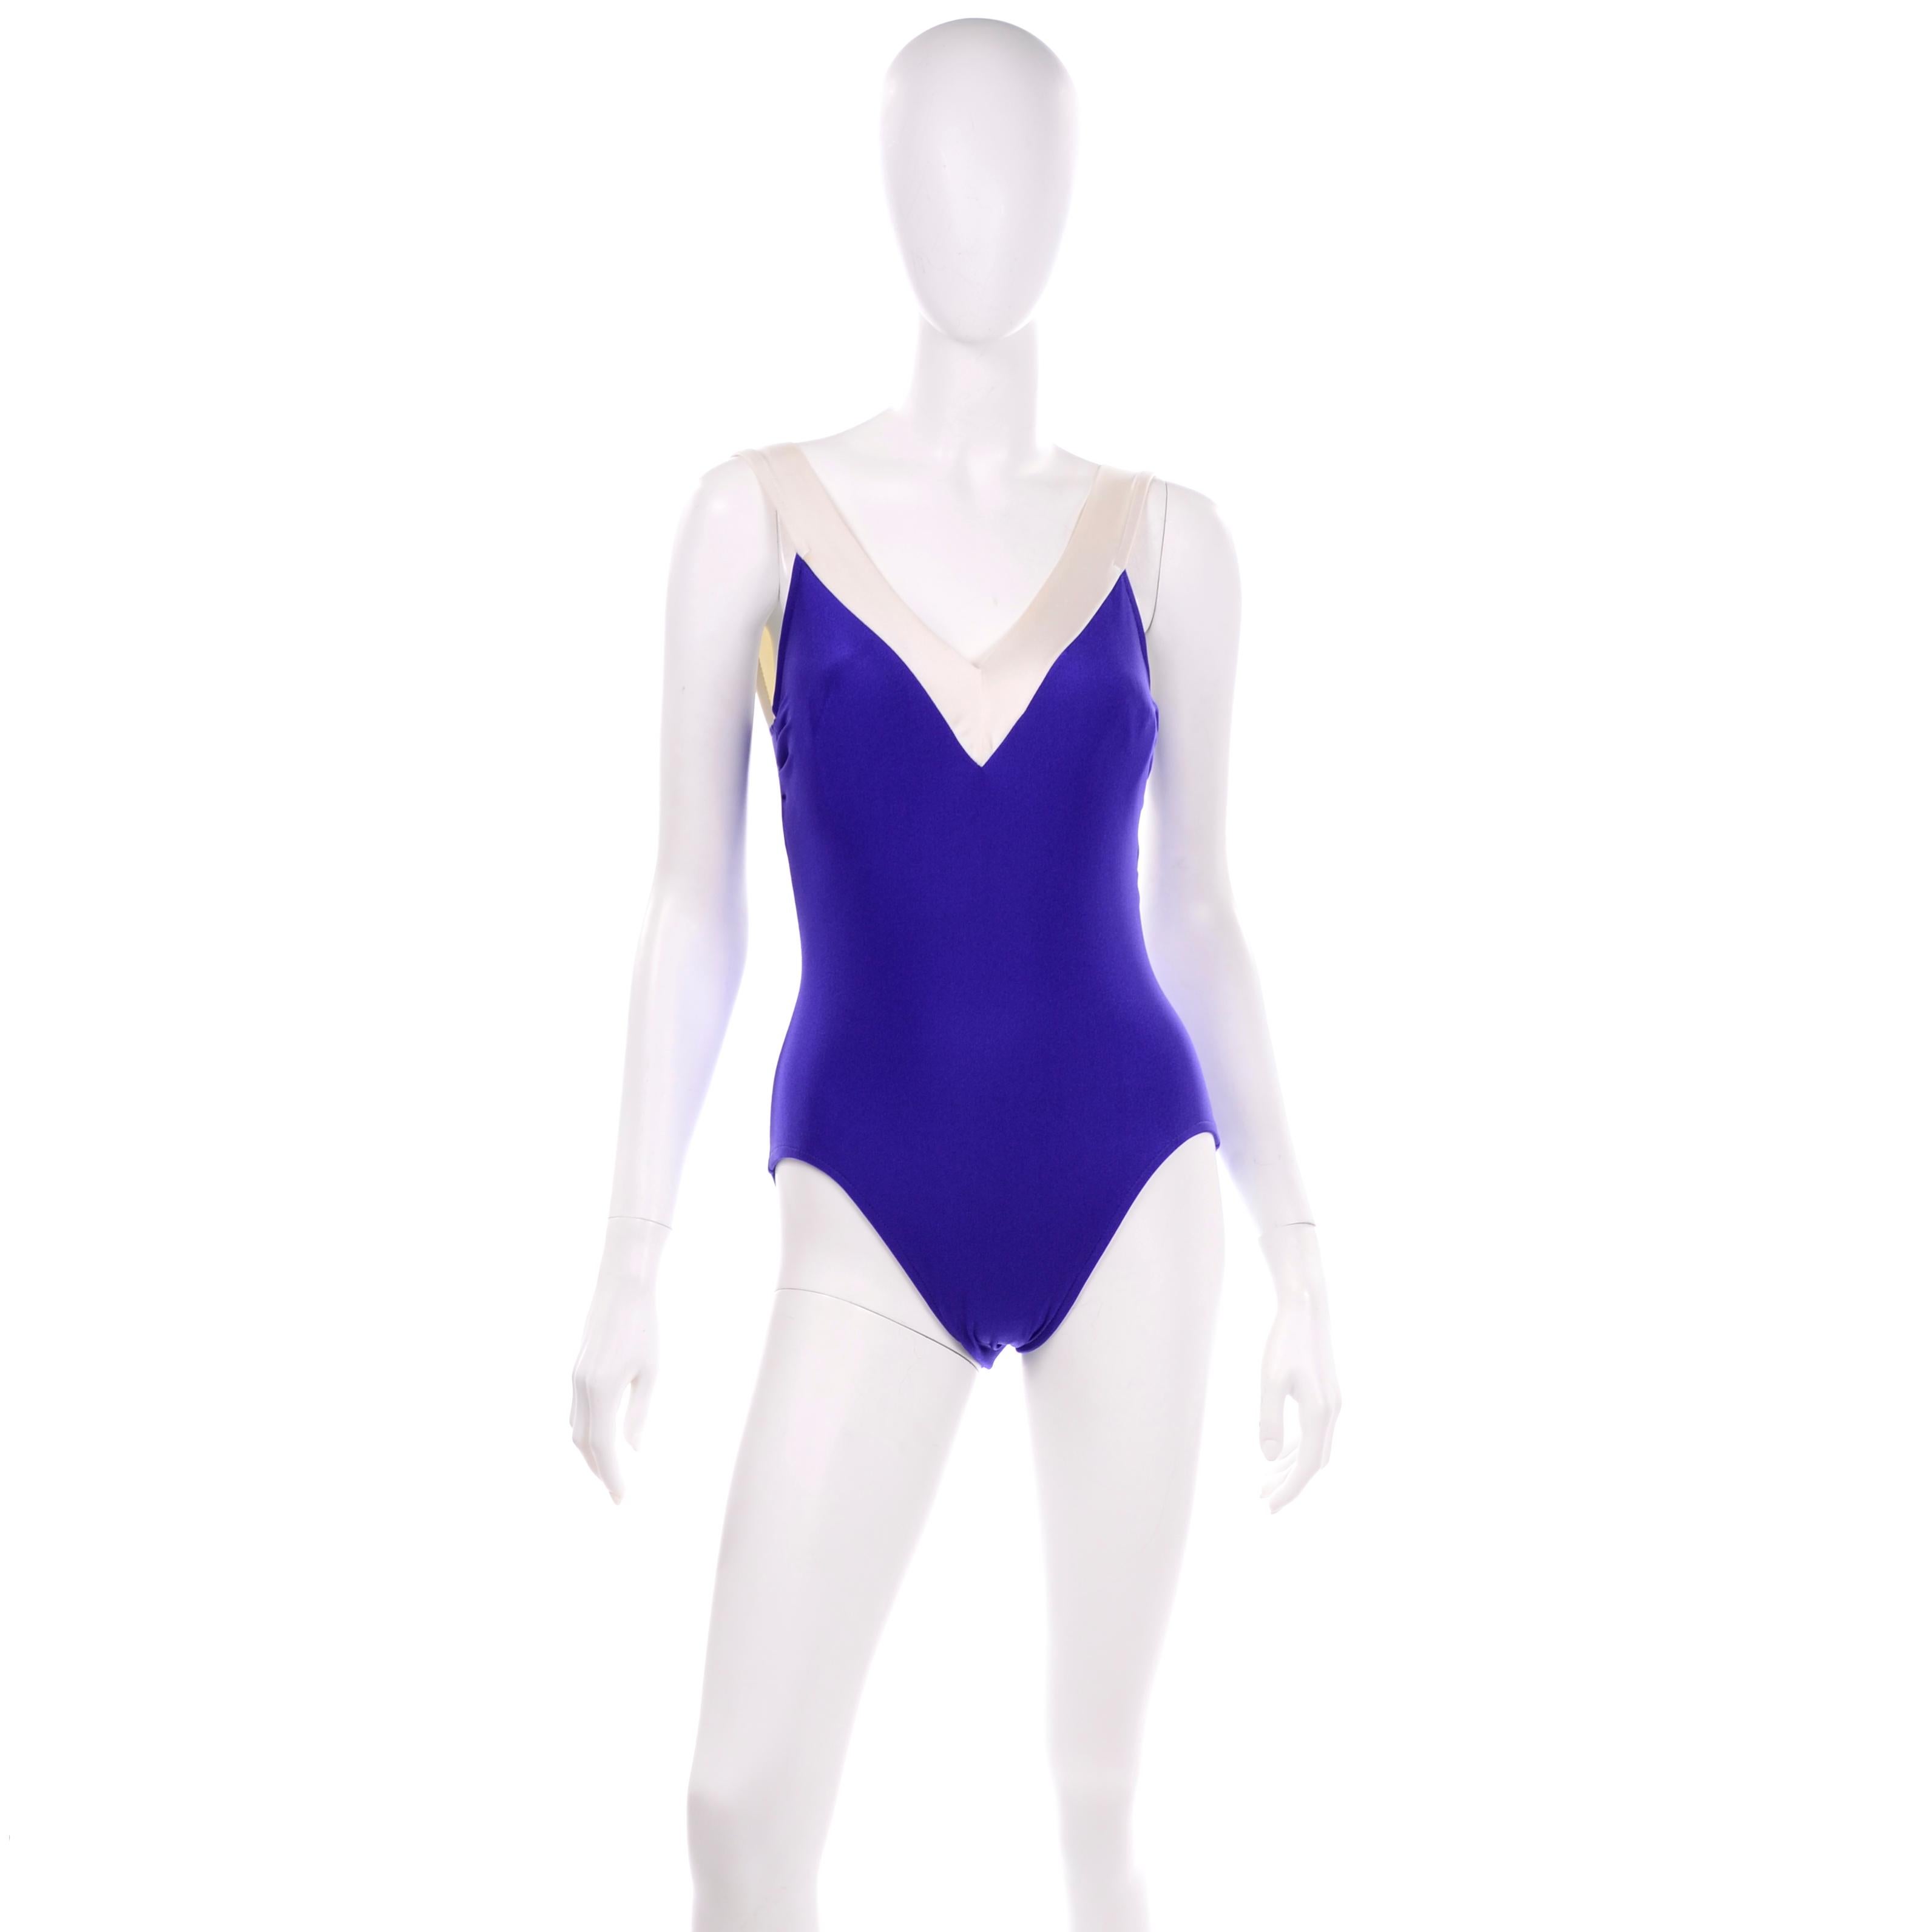 This vintage one piece purple/blue Bill Blass swimsuit is trimmed in ivory and has a low back.  High cut on the sides with soft cups, this suit was designed by Bill Blass and is very flattering! We estimate it to fit a size 10 but please use the